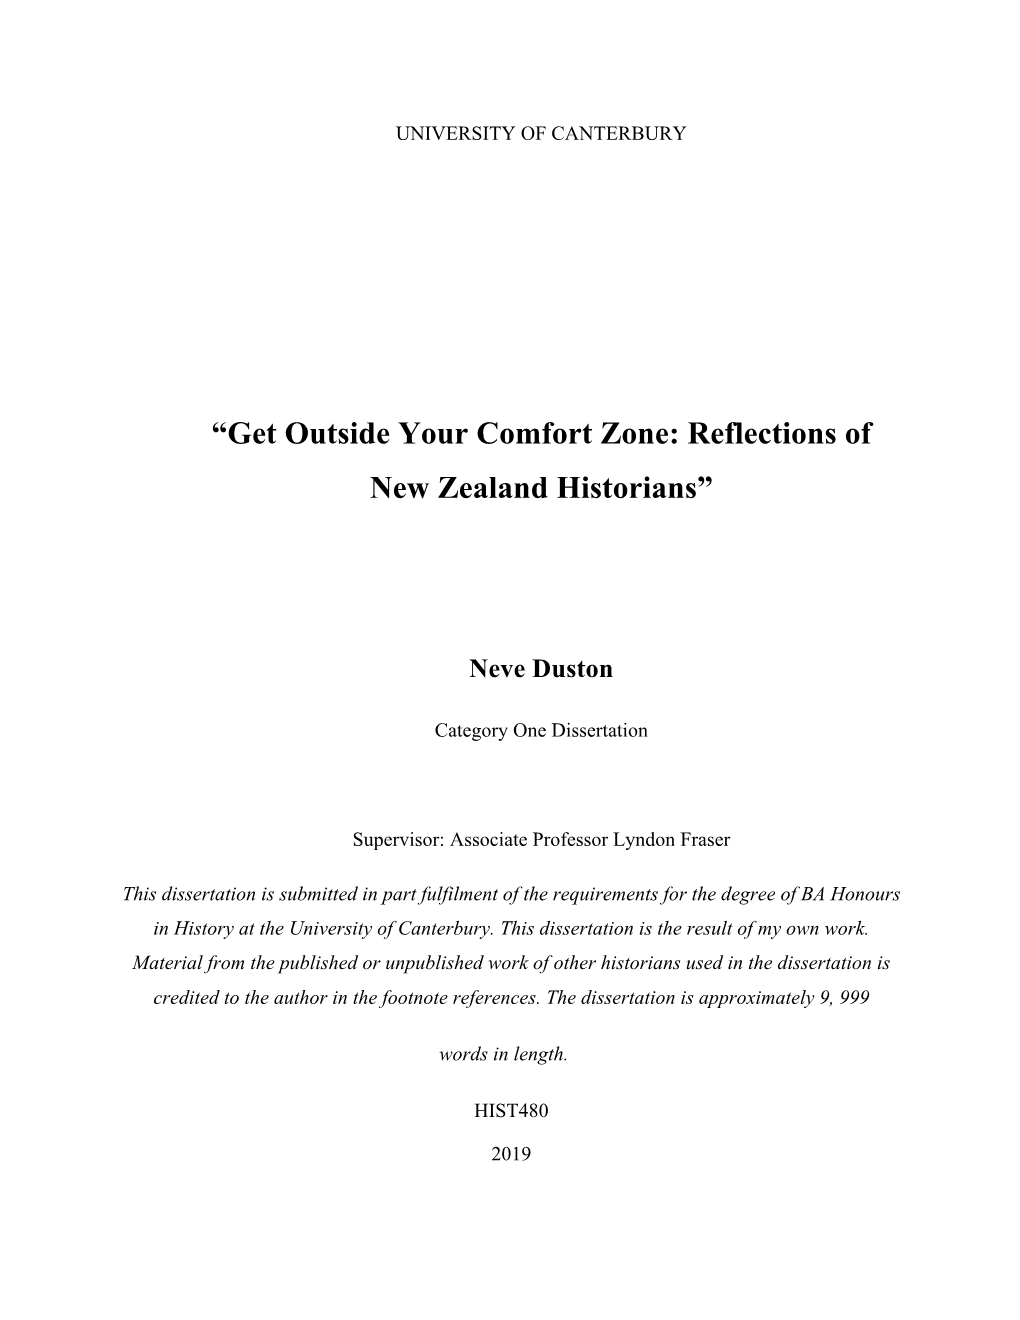 Get Outside Your Comfort Zone: Reflections of New Zealand Historians”